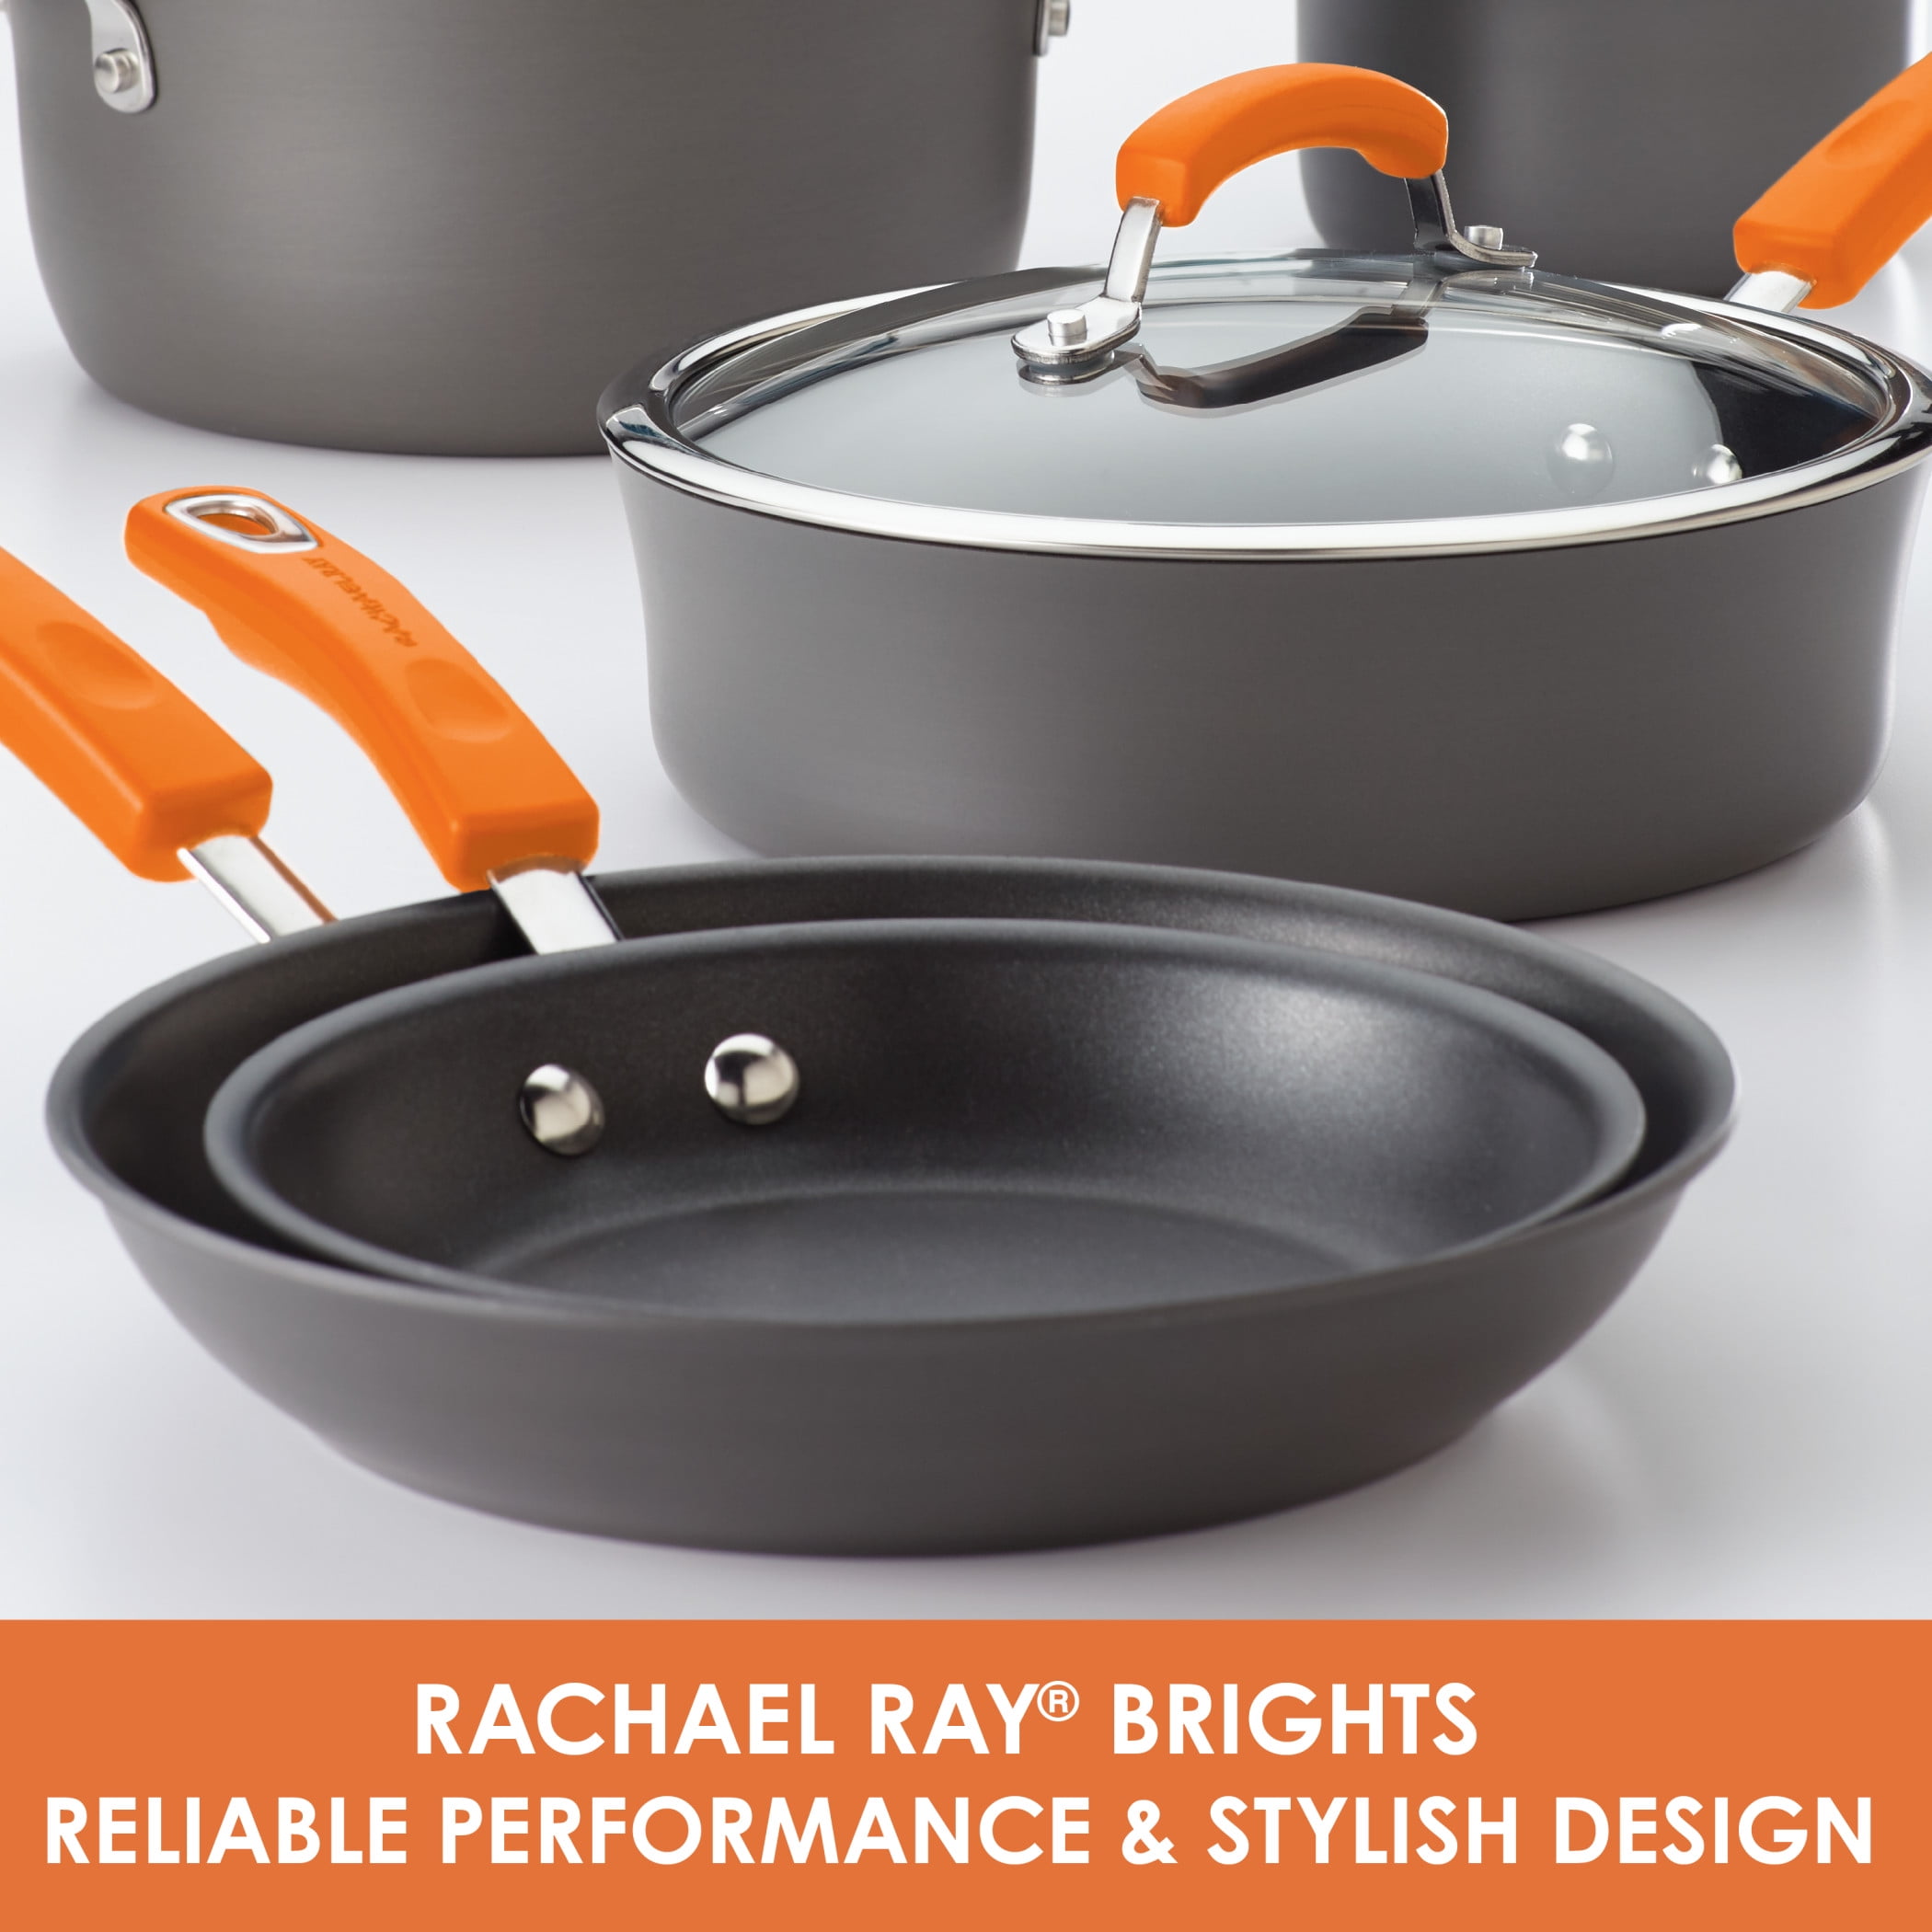 11 Inch Rachael Ray Brights Hard Anodized Nonstick Square Griddle Pan/Grill Gray with Orange Handles